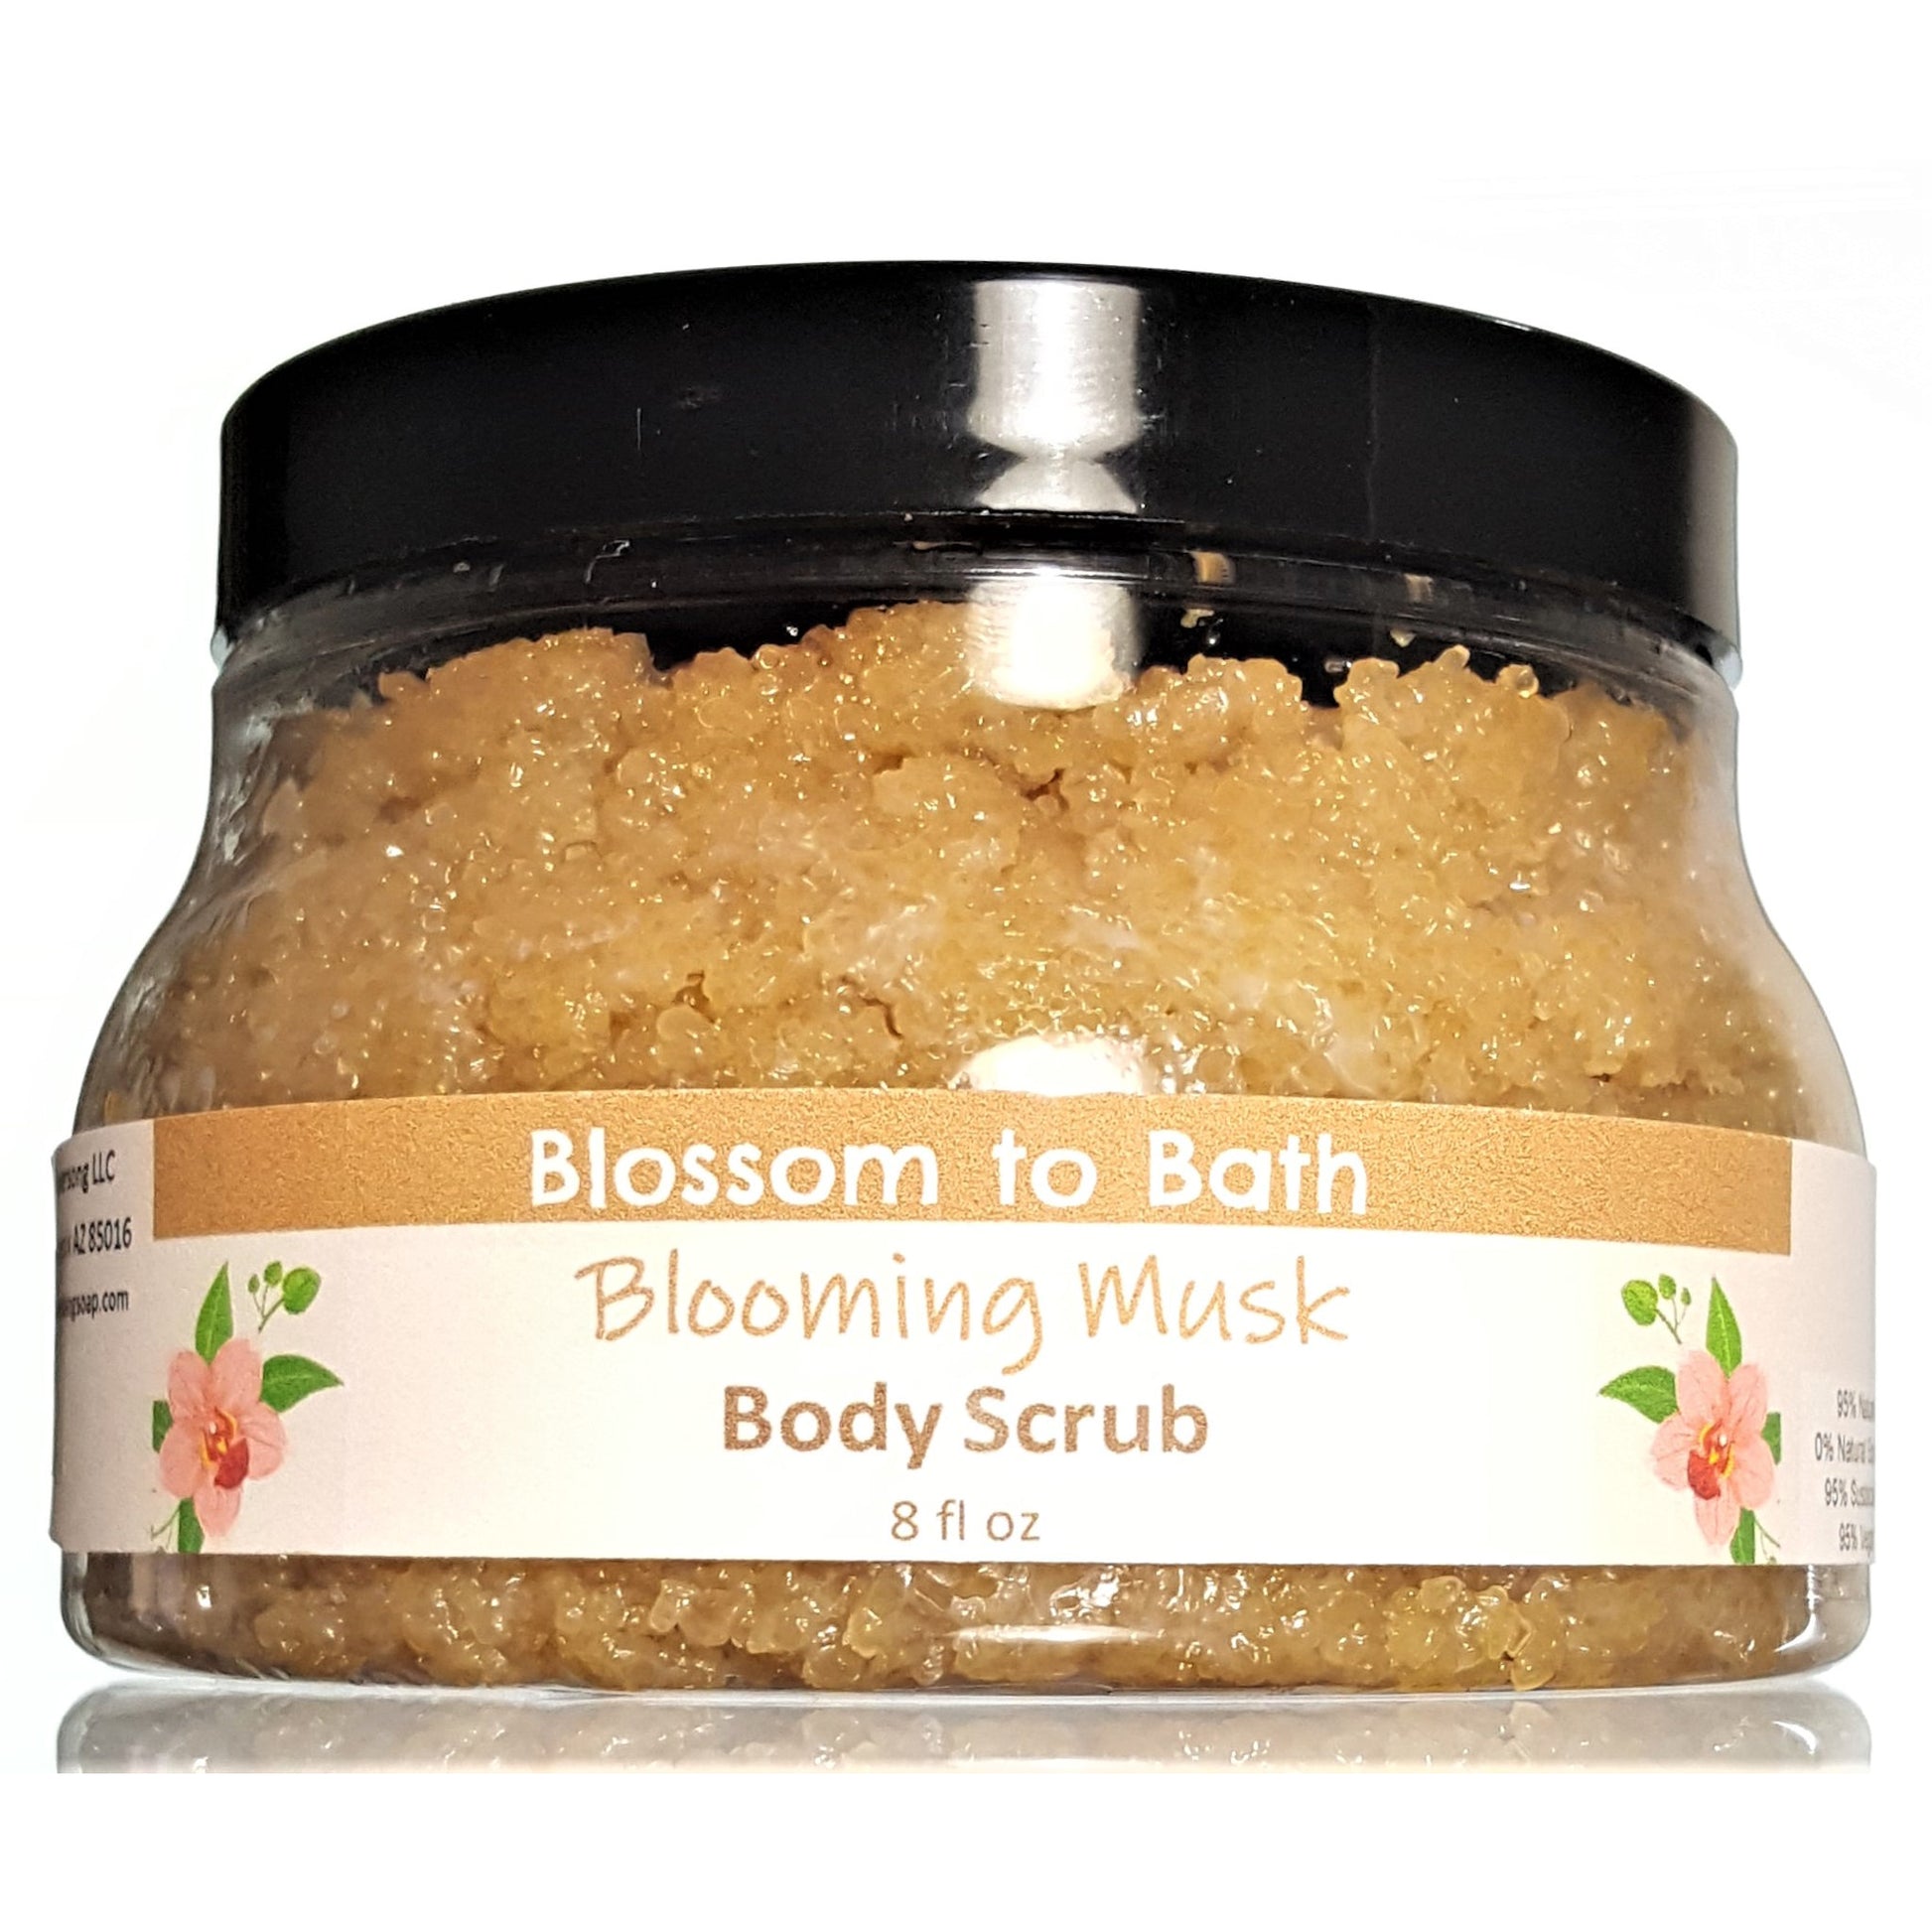 Buy Blossom to Bath Blooming Musk Body Scrub from Flowersong Soap Studio.  Large crystal turbinado sugar plus  rich oils conveniently exfoliate and moisturize in one step  A sensual floral and musk scent that is subtle and feminine.